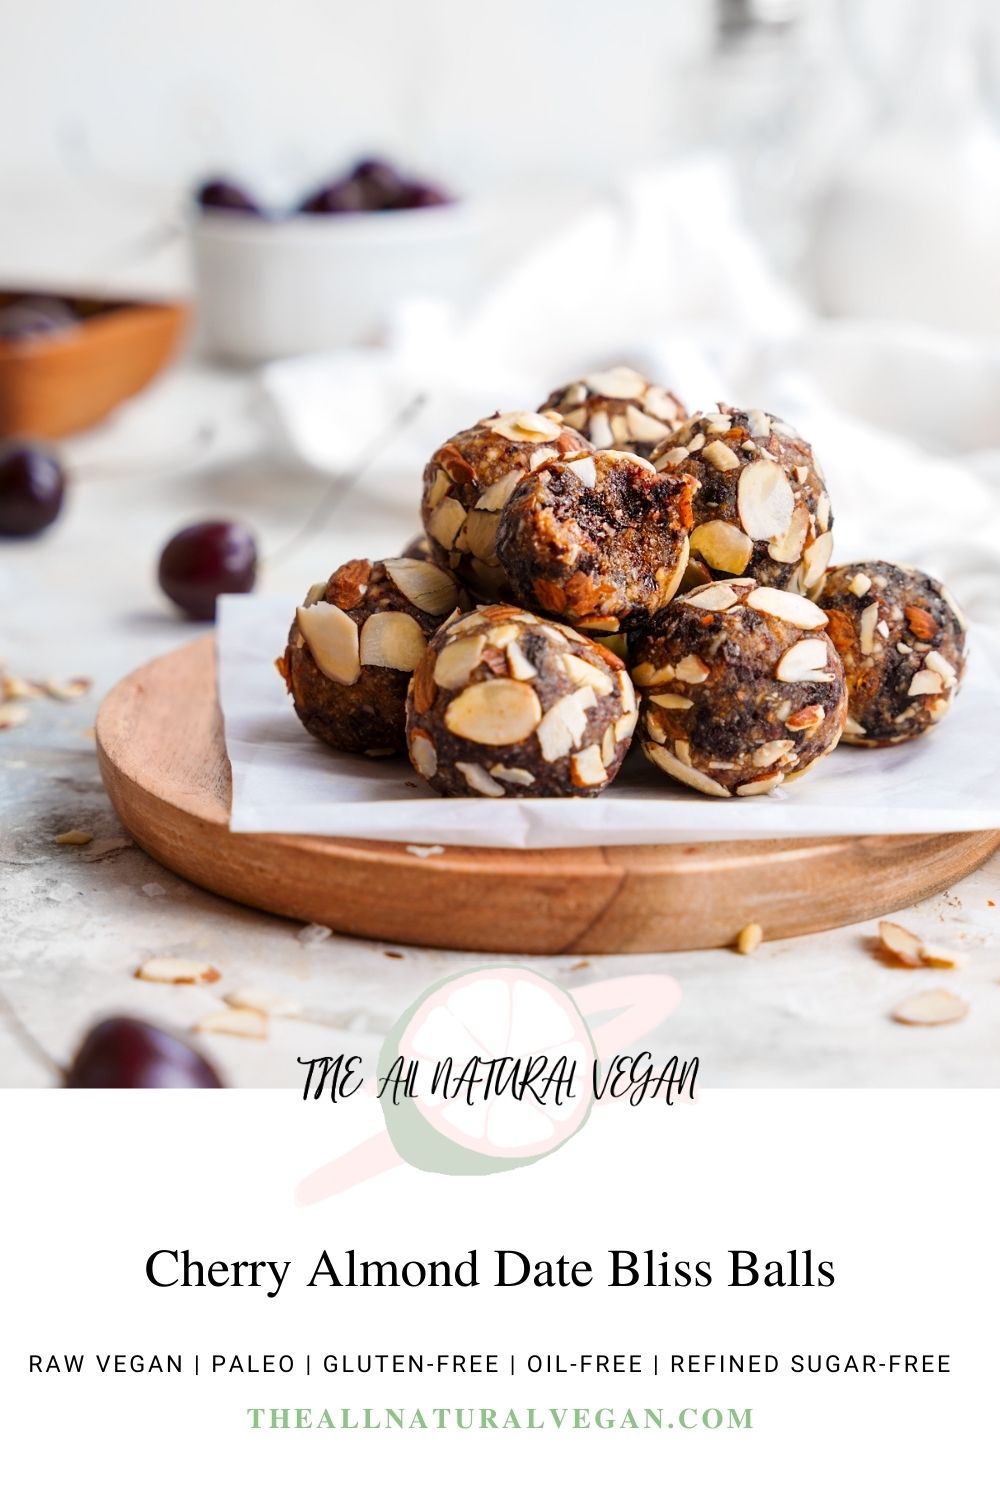 date energy ball recipe card stating this recipe is raw vegan, oil-free, gluten-free, paleo, and refined sugar-free